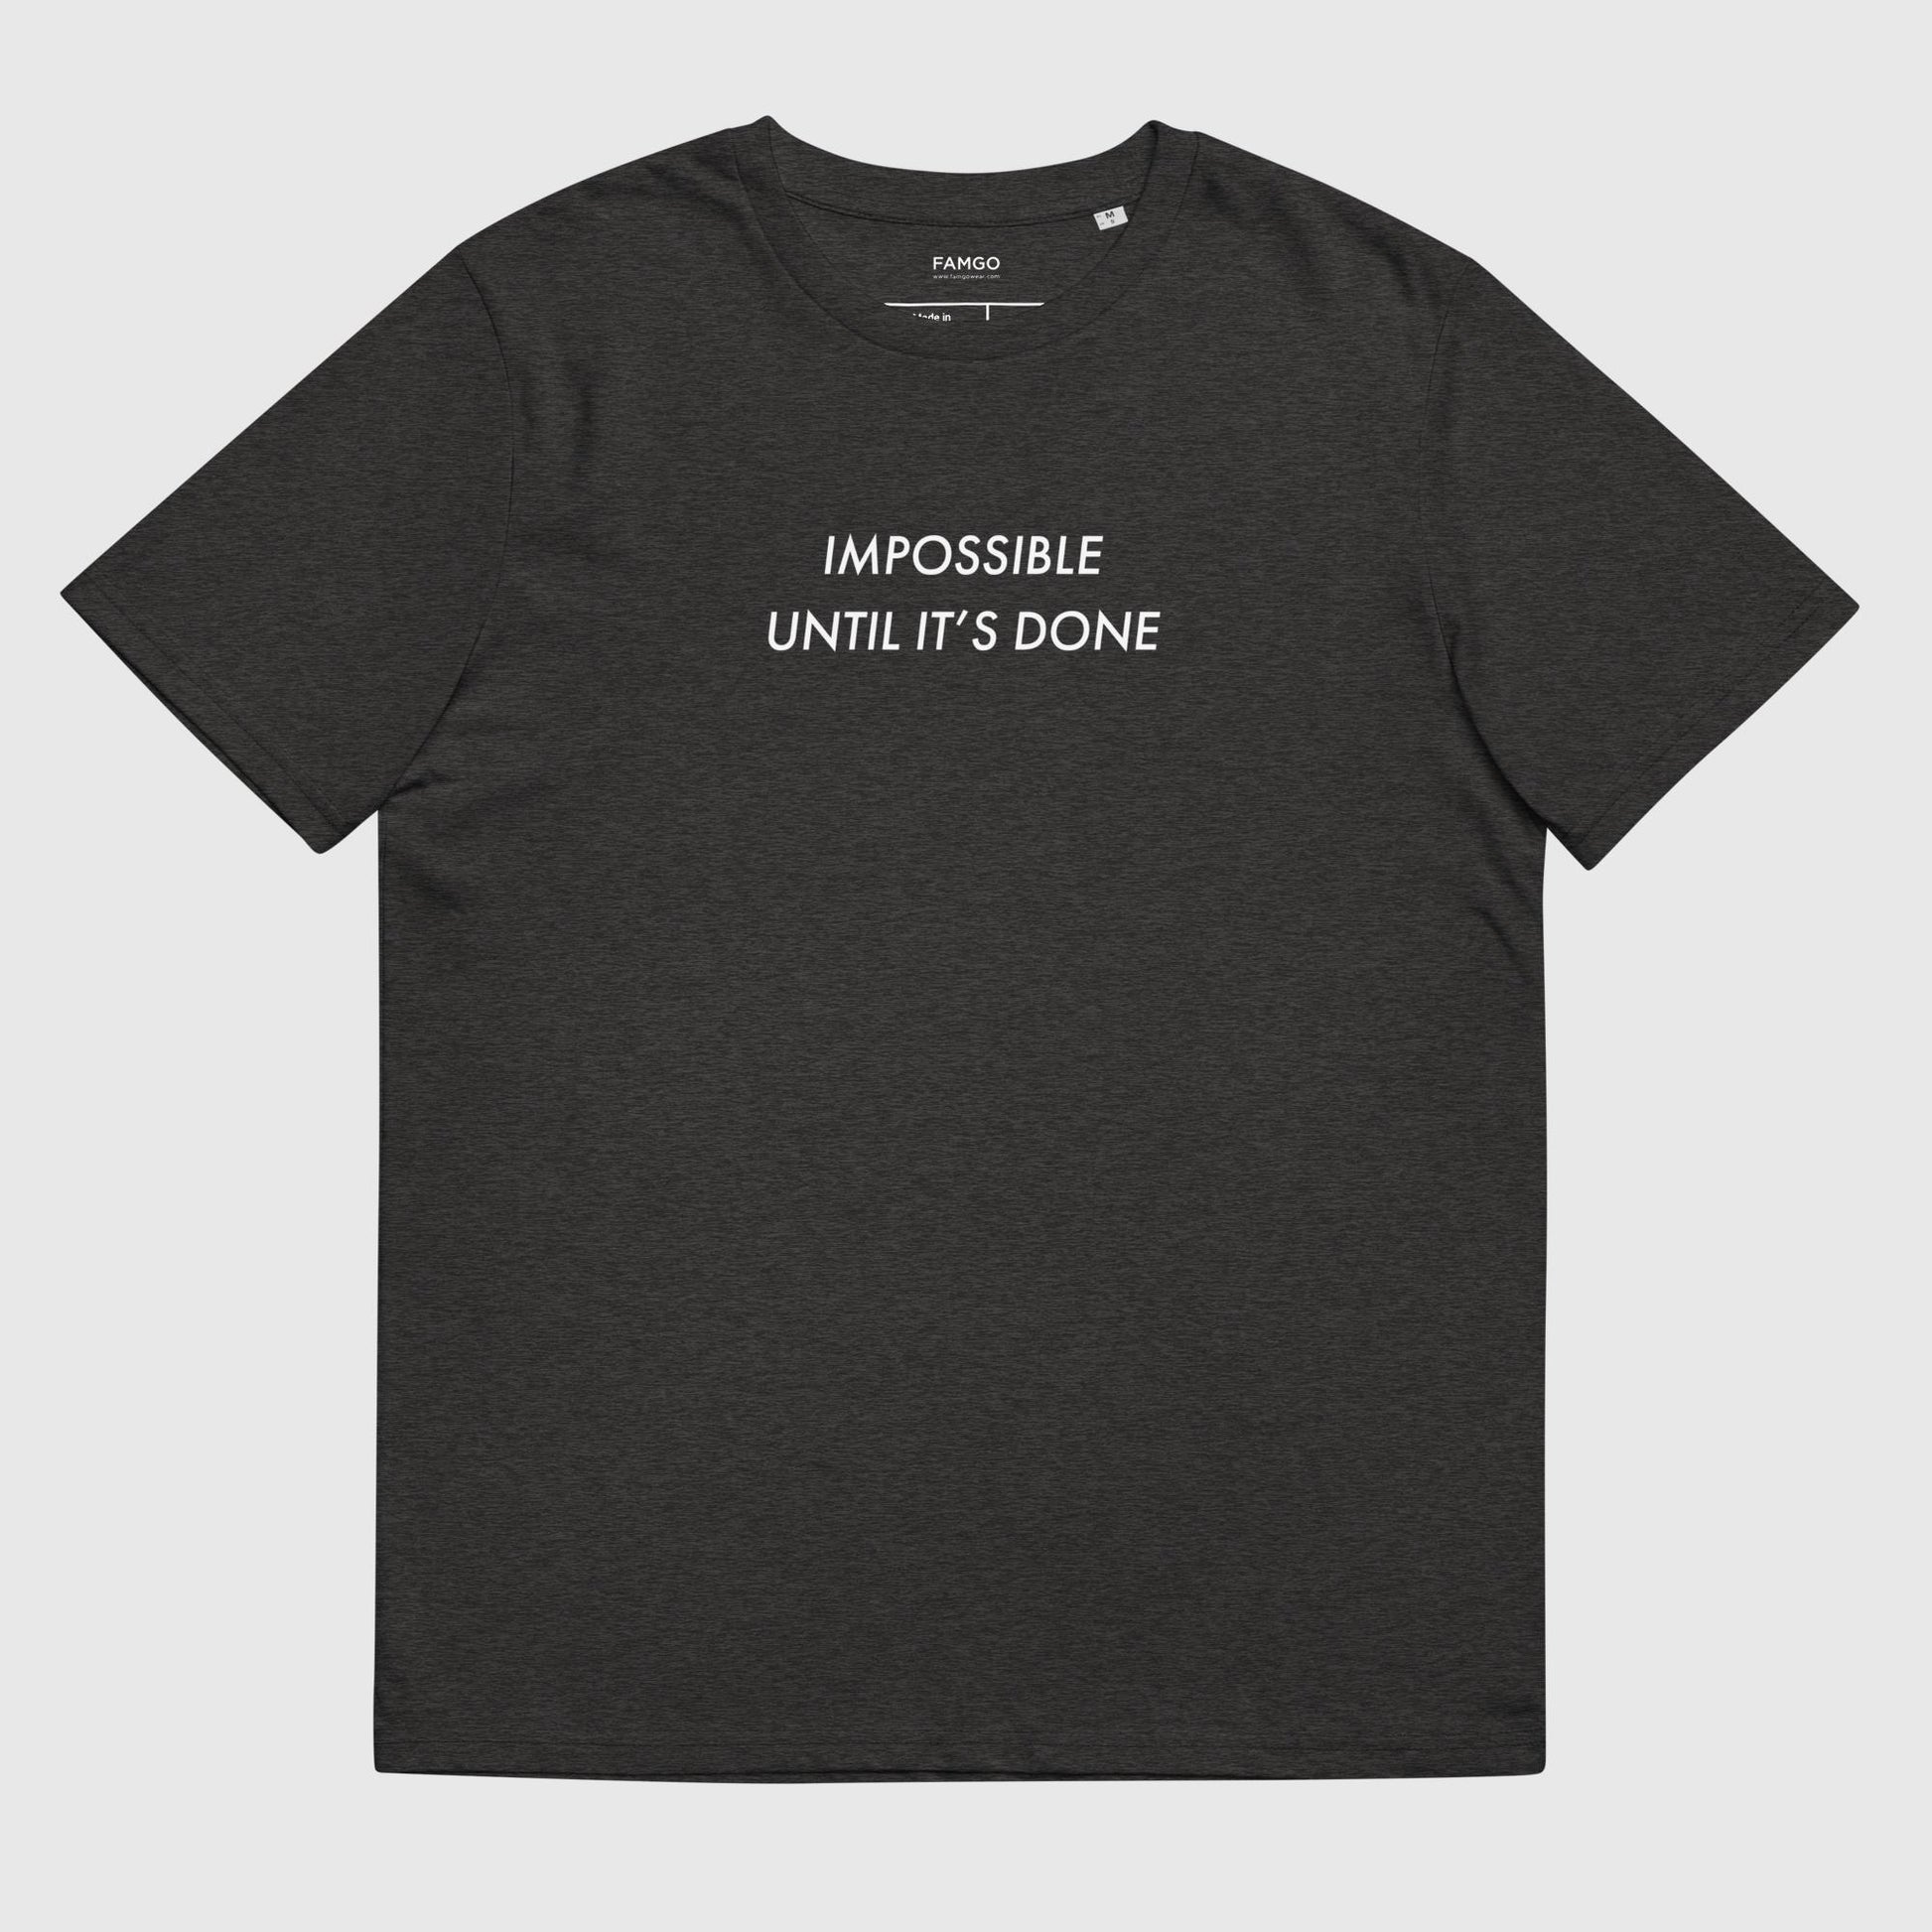 Men's dark gray organic cotton t-shirt that features, "Impossible Until It's Done," inspired by Nelson Mandela's inspirational quote, "It always seems impossible until it's done."